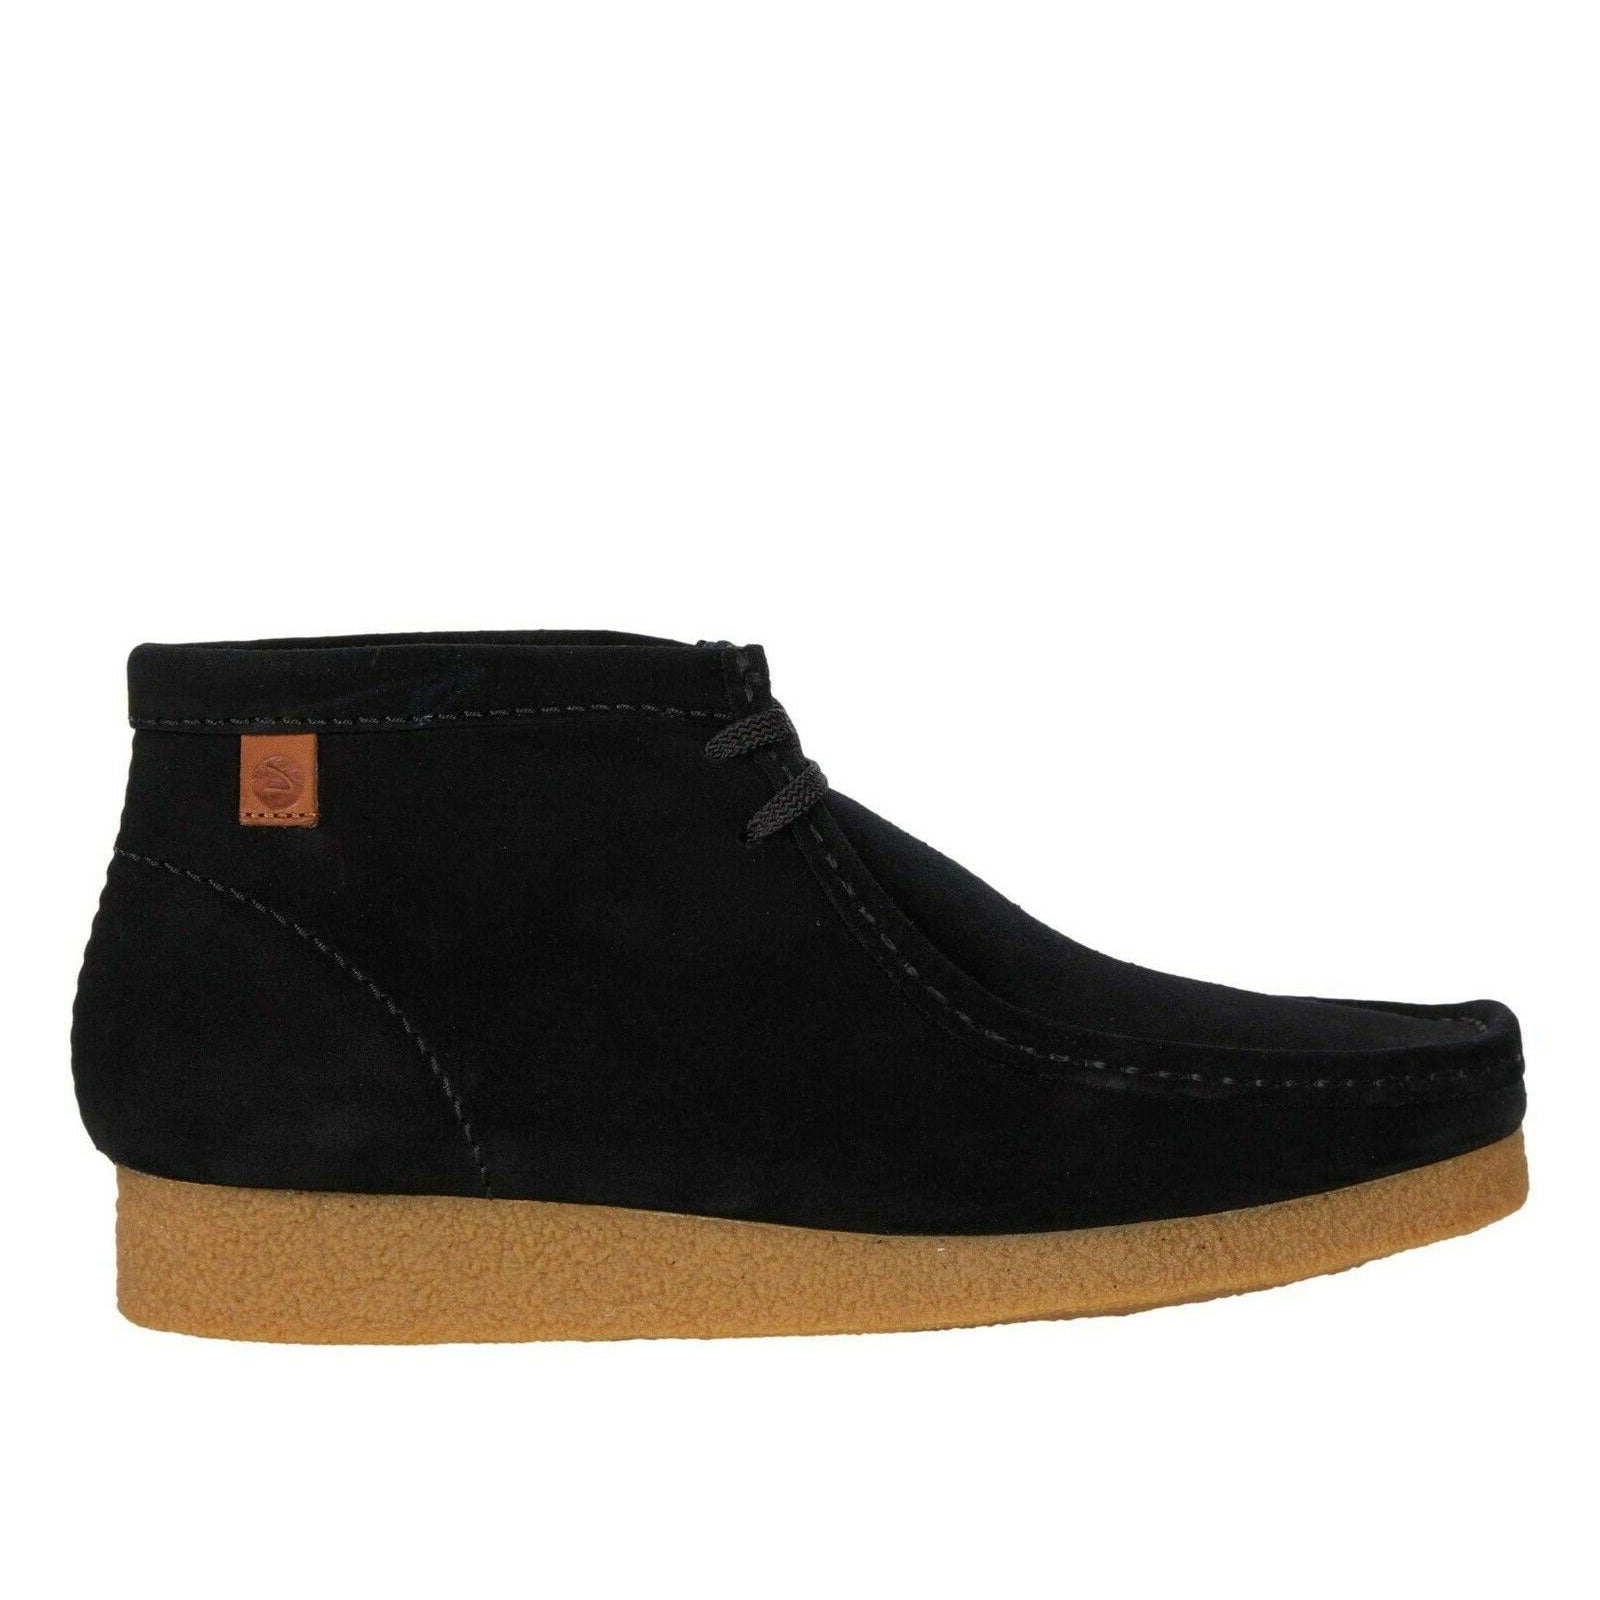 Clarks Shacre Boot 59437 (Black Suede)